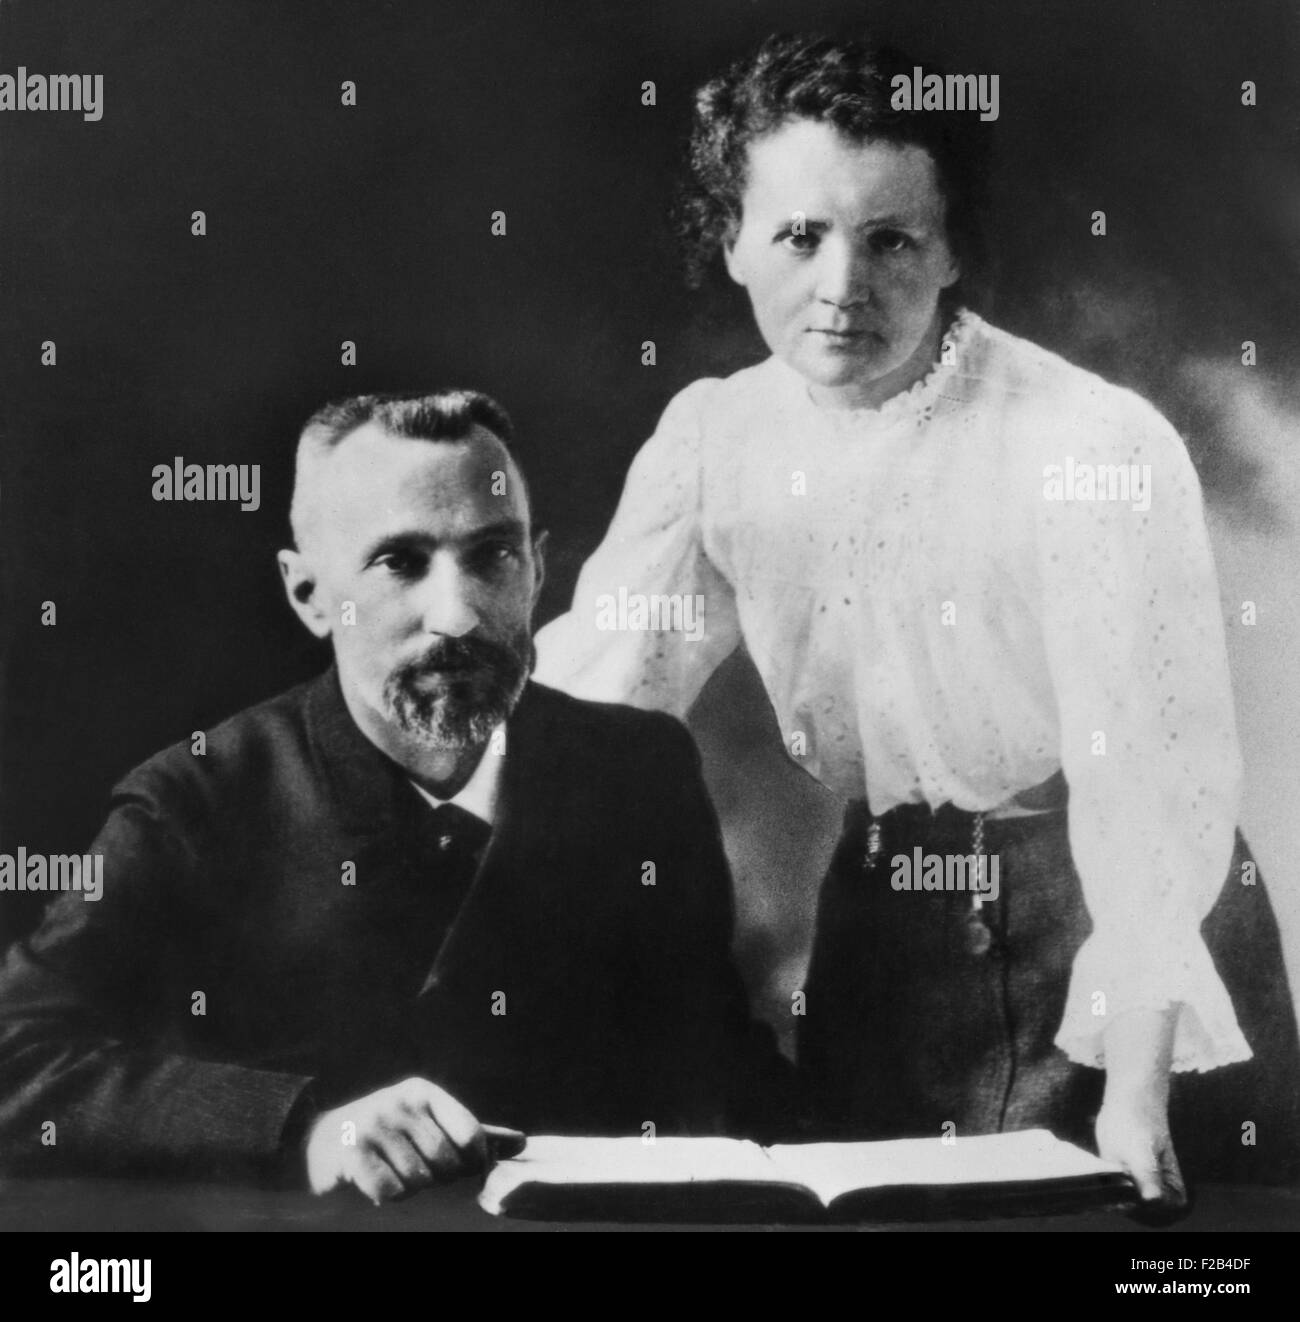 Pierre Curie and Marie Sklodowska Curie (1867-1934), c. 1903. The couple shared the 1903 Nobel Prize in Physics with physicist Henri Becquerel. - (BSLOC 2015 1 68) Stock Photo